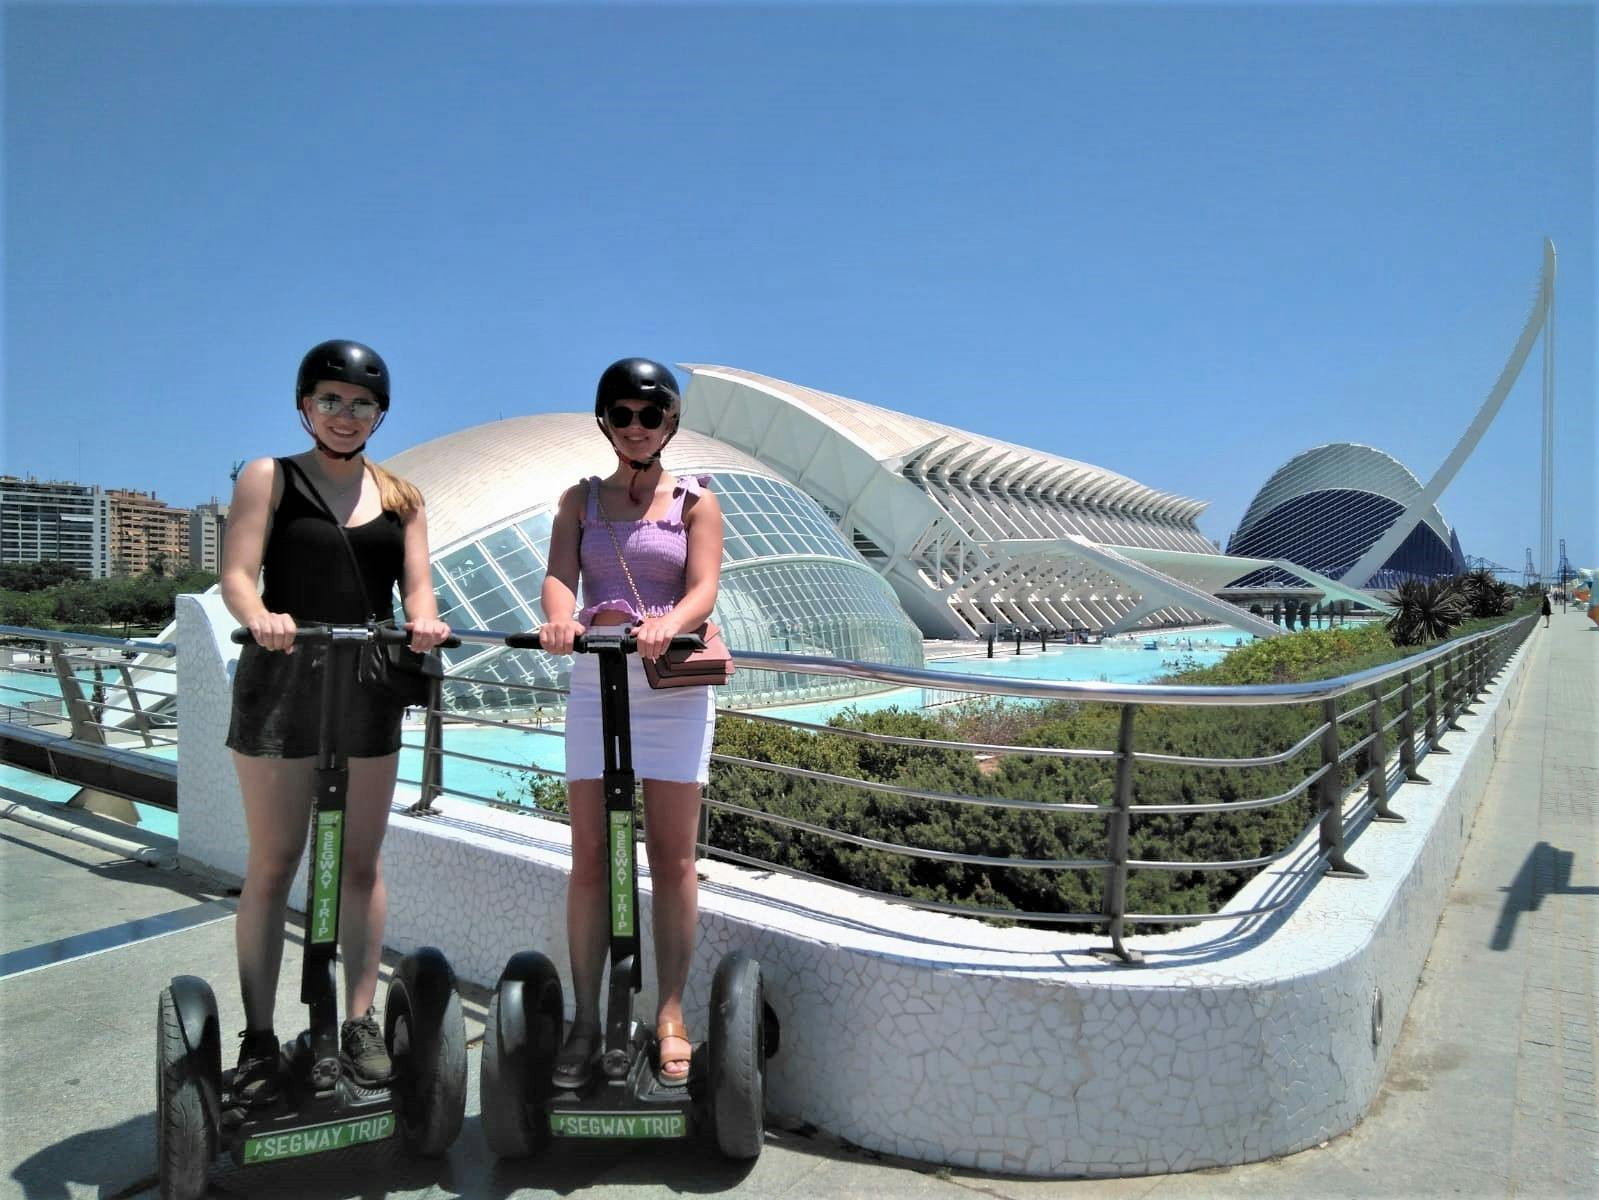 City of Arts and Sciences Segway™ tour in Valencia Musement